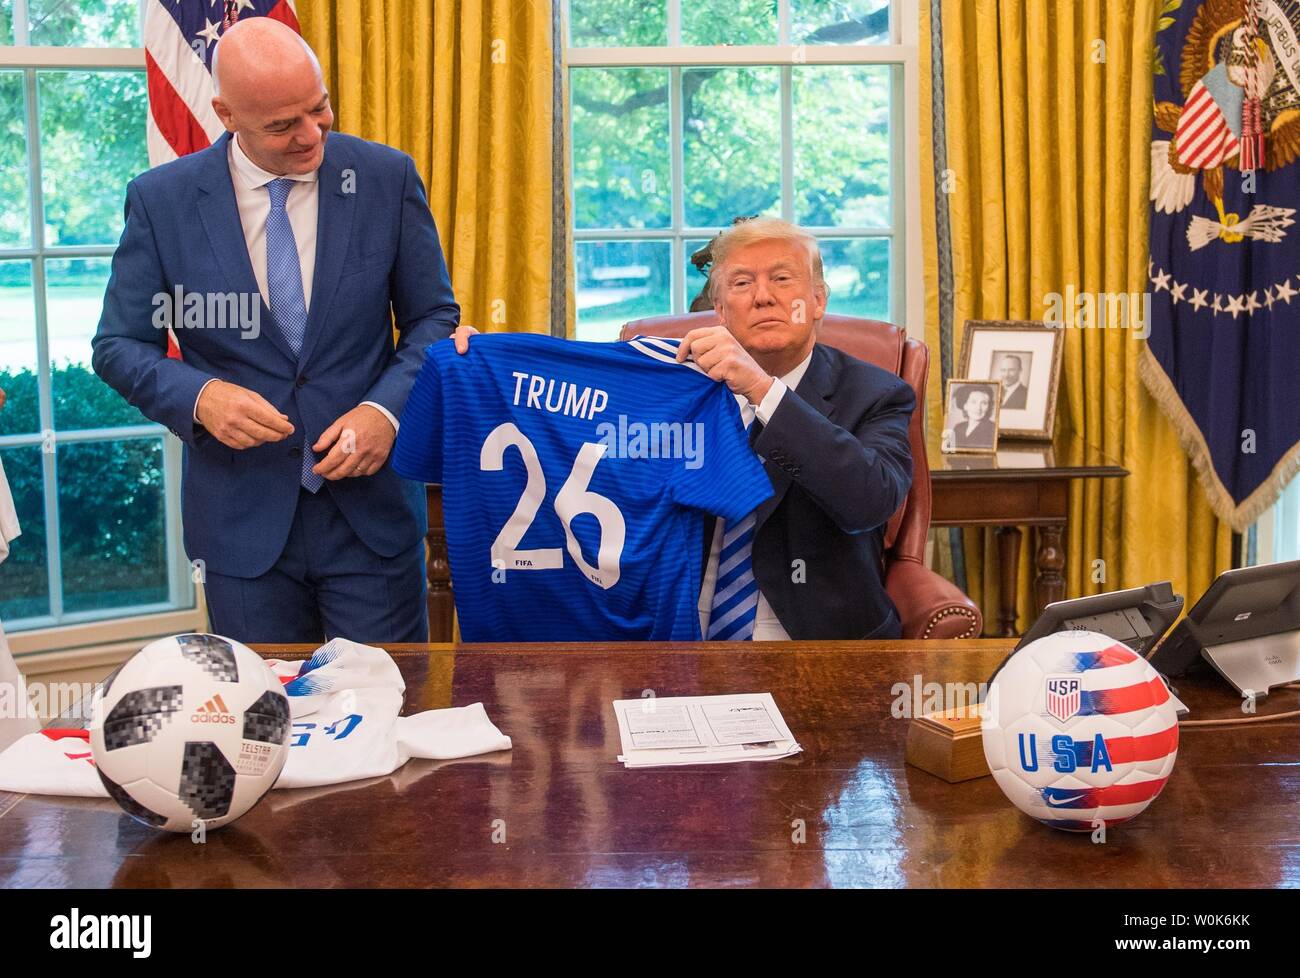 President Donald Trump holds up a World Cup jersey given to him as a gift  by President of FIFA Gianni Infantino, during a media in the Oval Office at  the White House